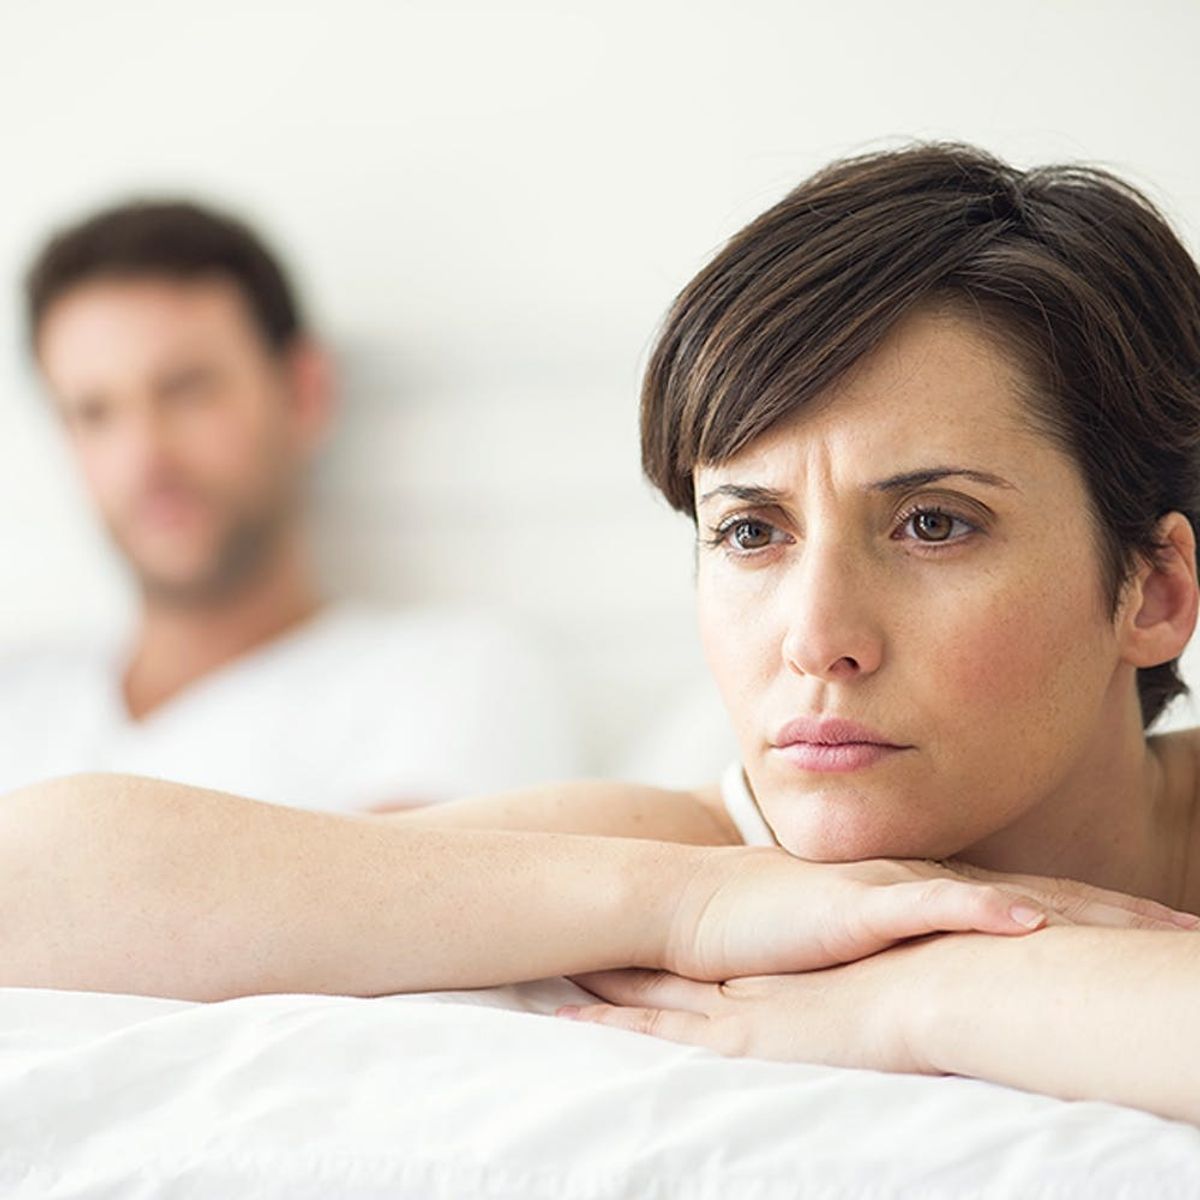 Your Partner Probably Knows When You’re Happy but Not When You’re Sad